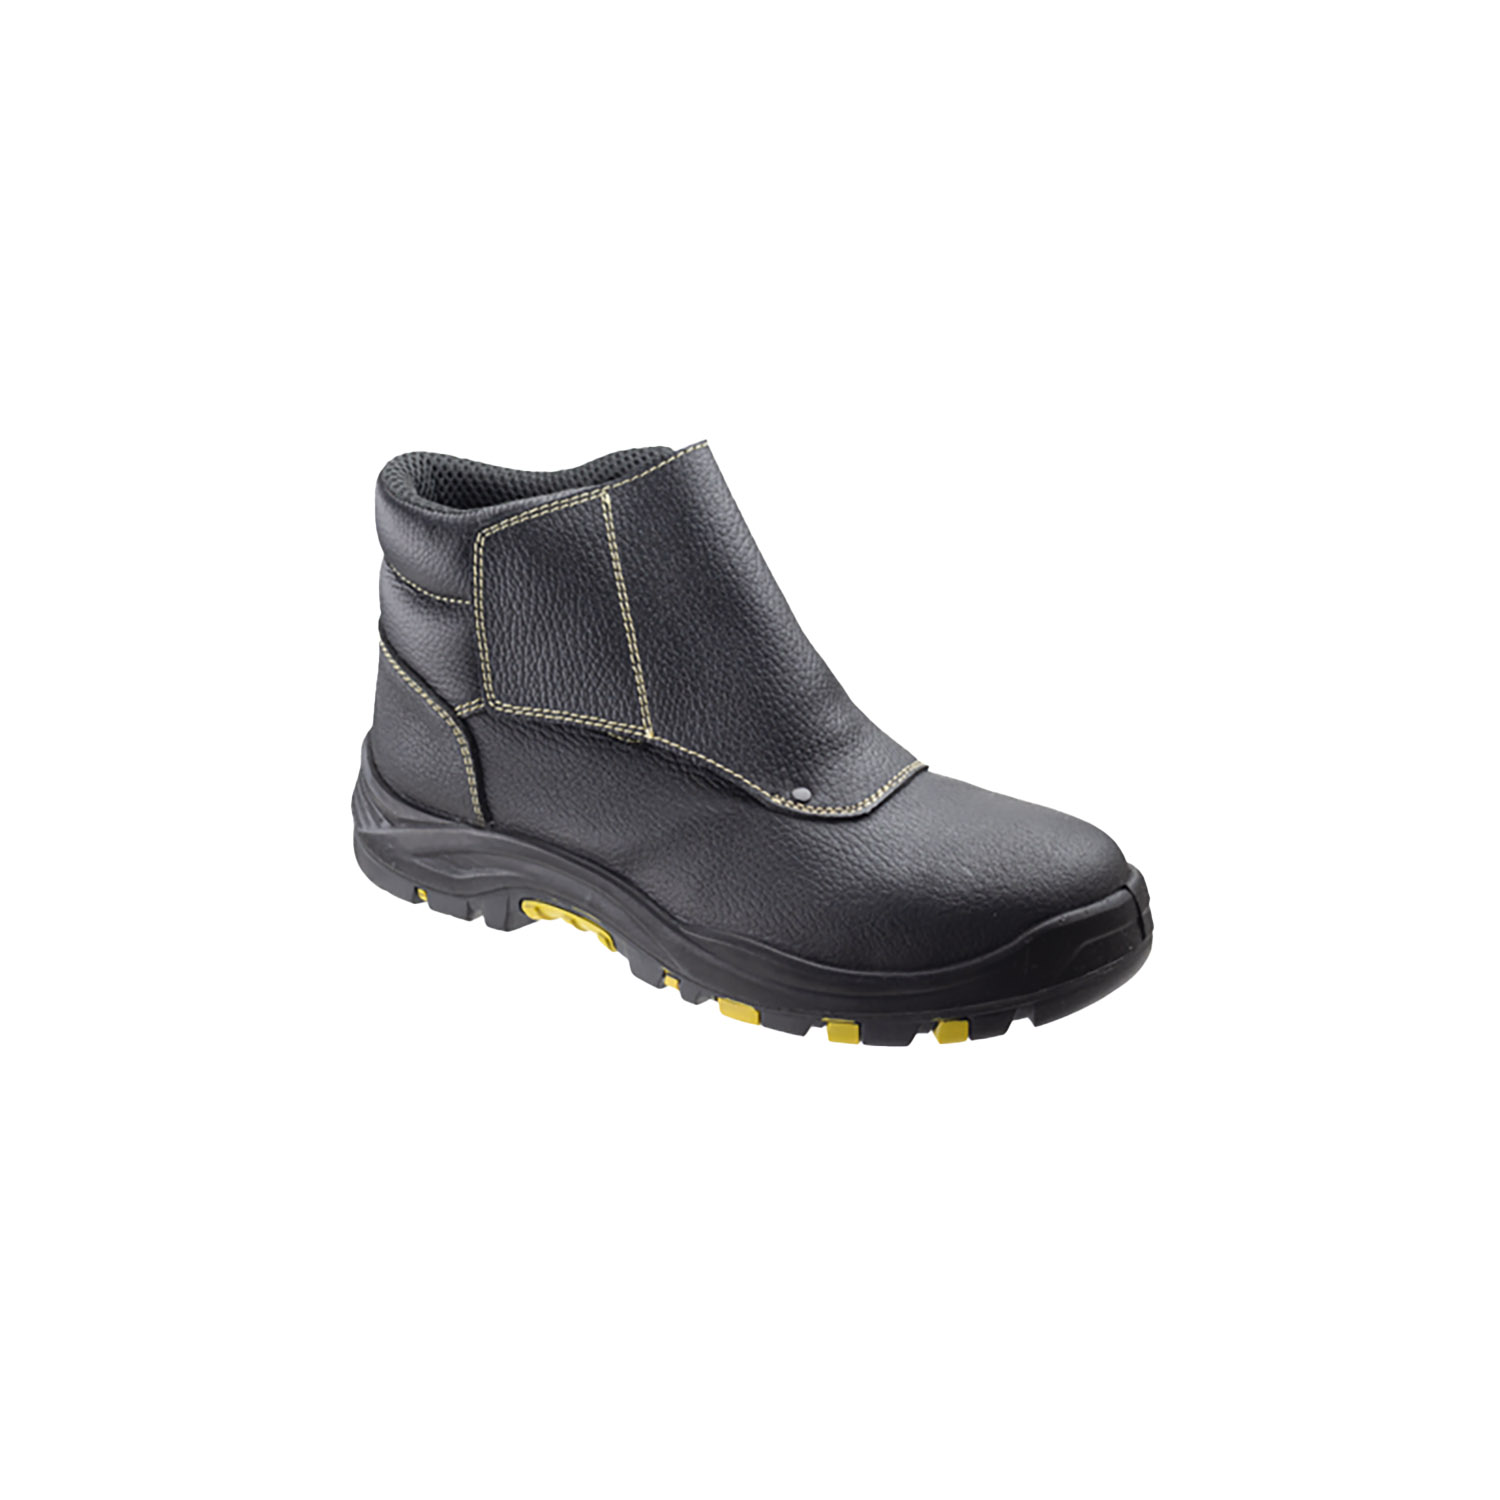 Welding Safety Shoes